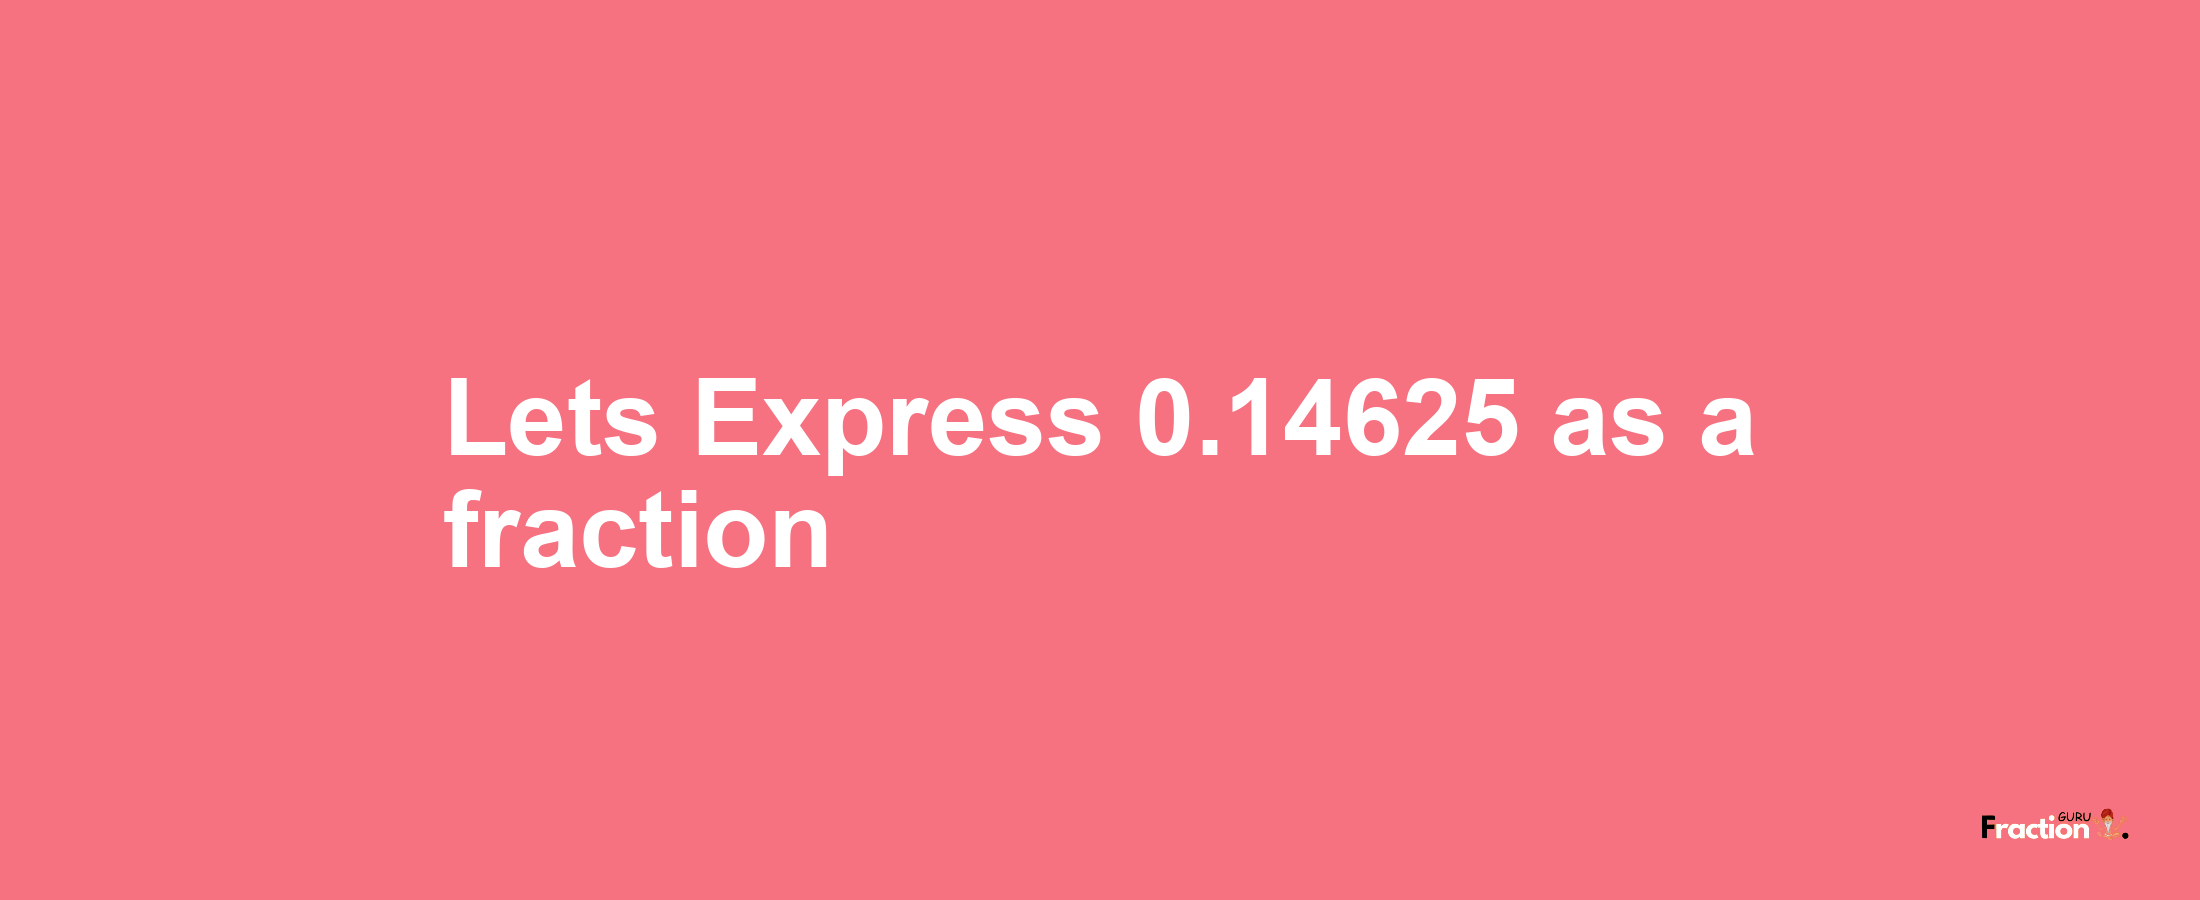 Lets Express 0.14625 as afraction